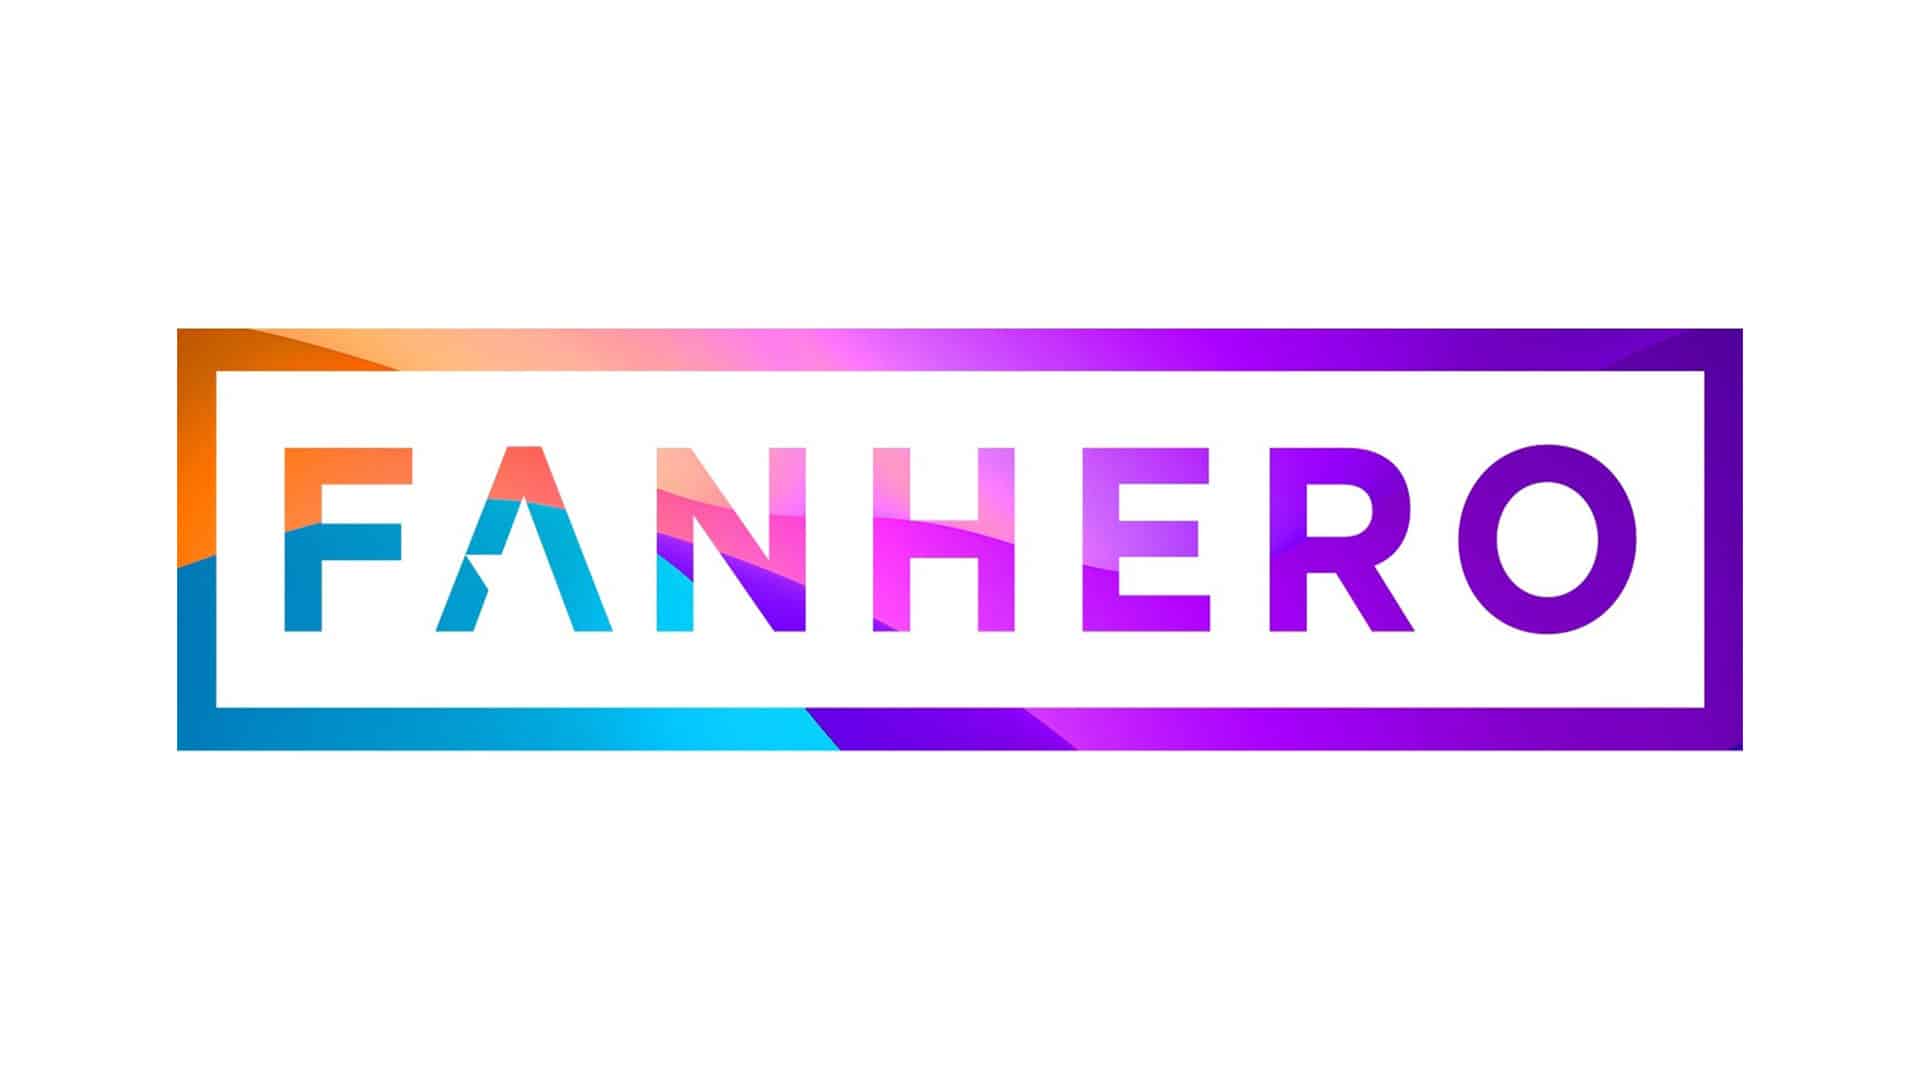 FanHero logo for live-streaming, monetization, and apps